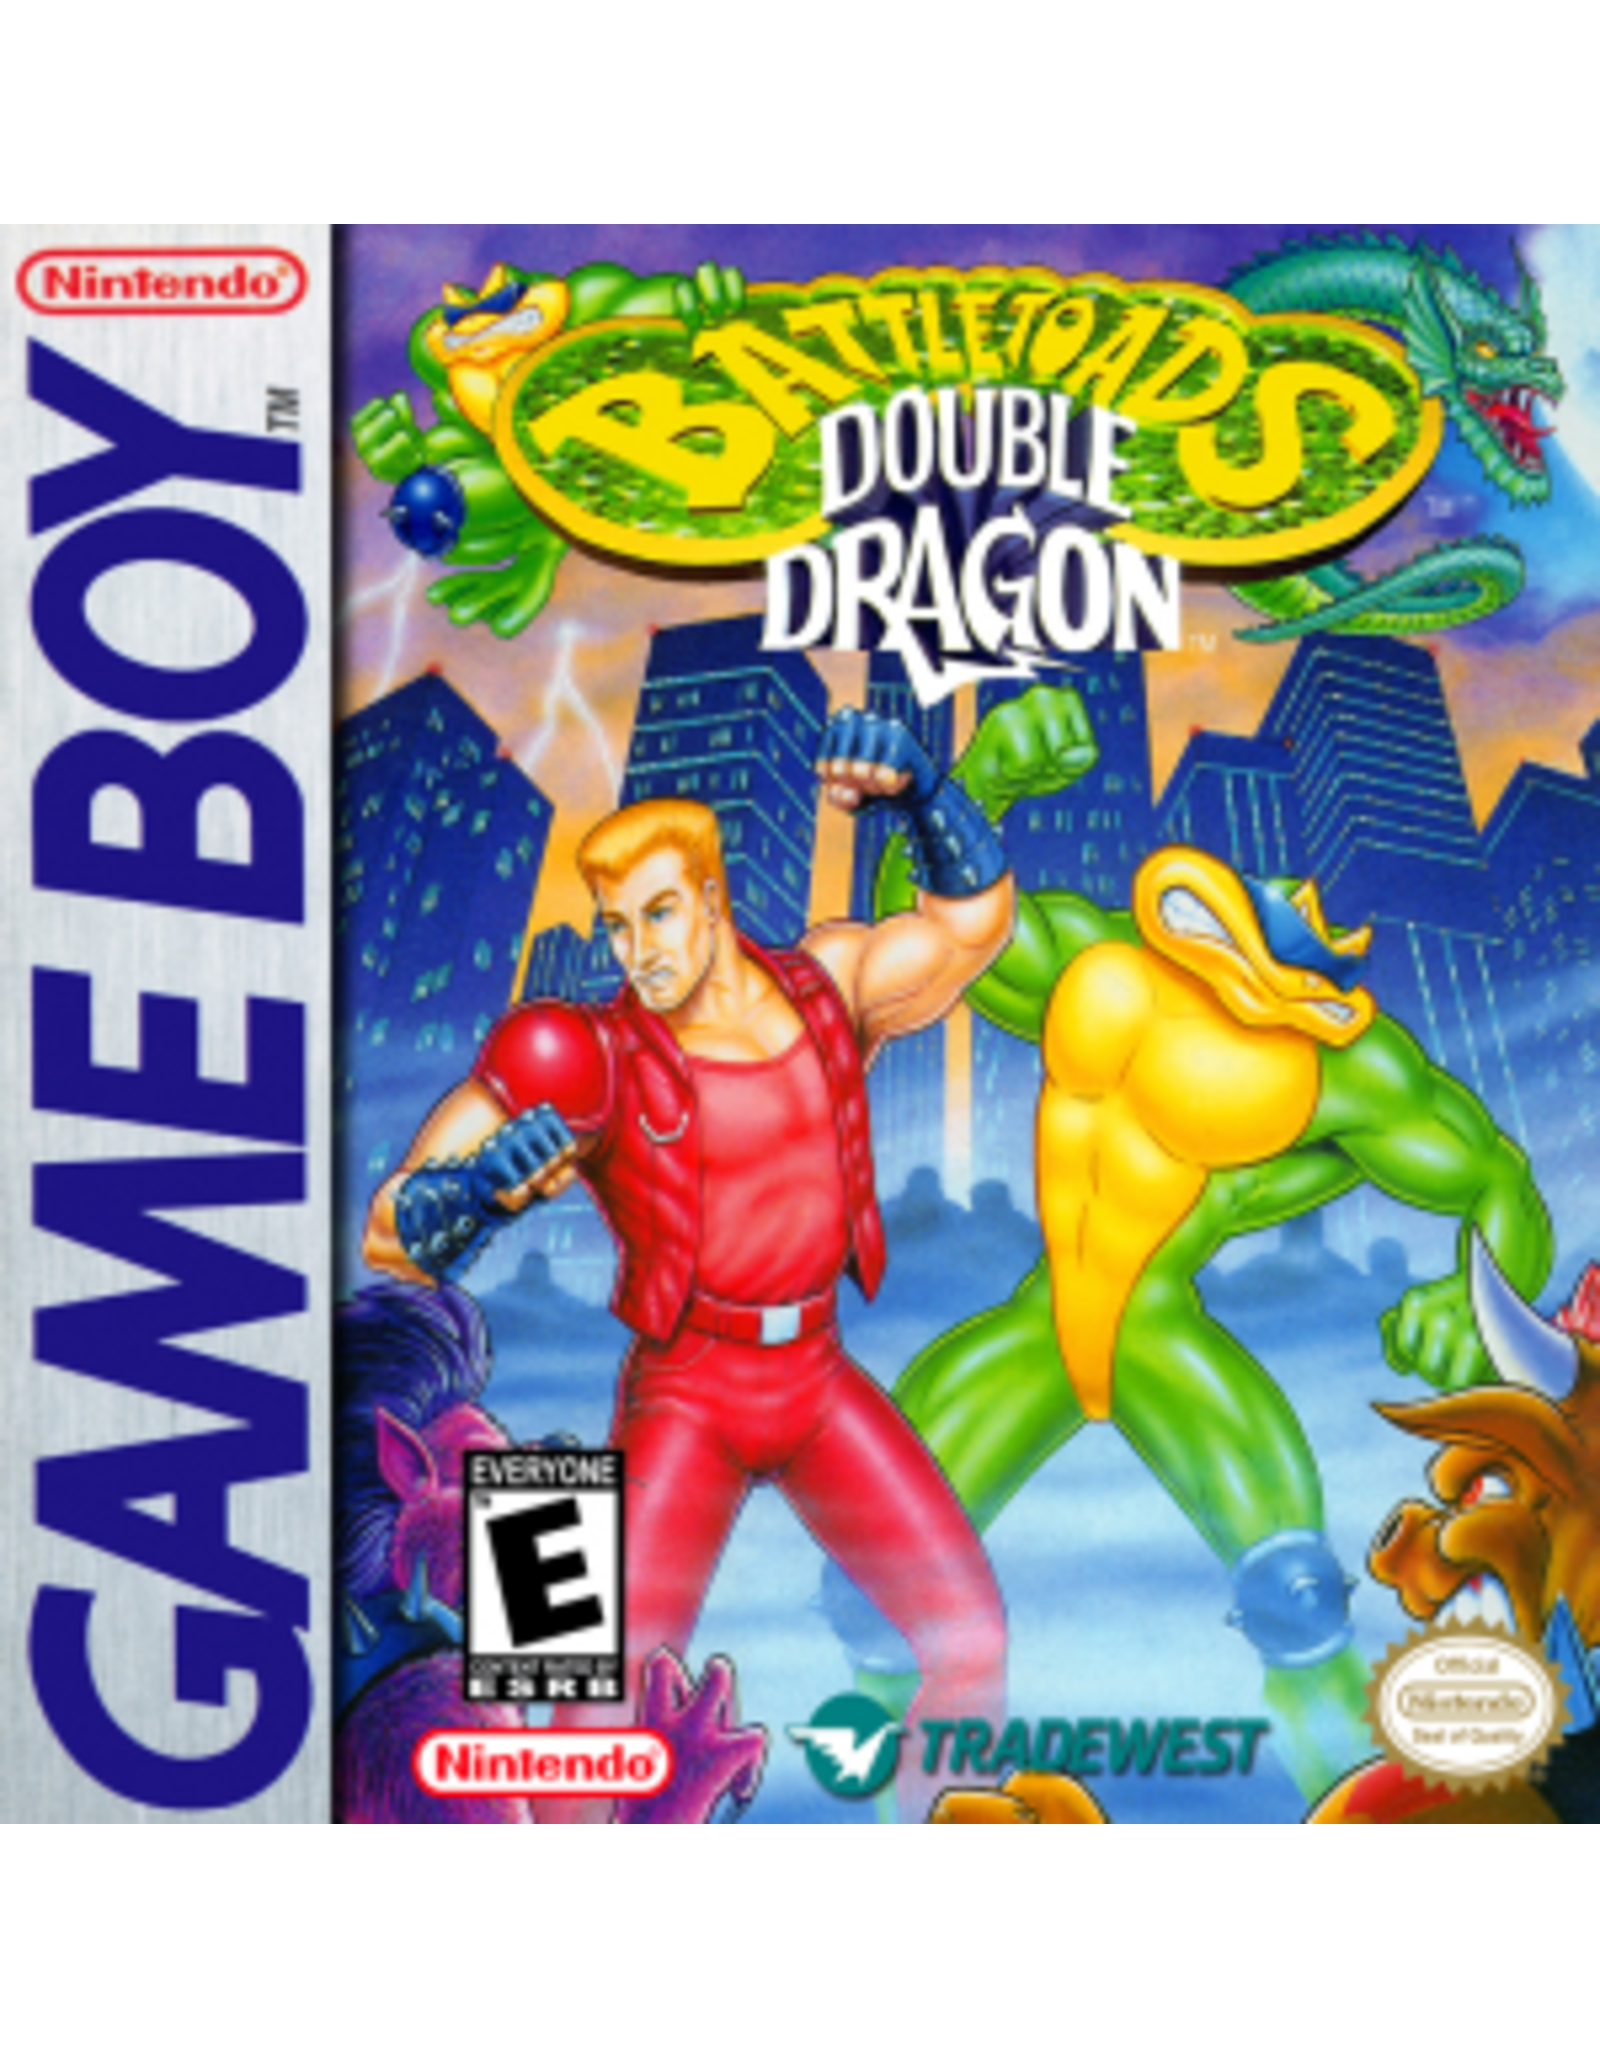 Game Boy Battletoads and Double Dragon (Cart Only)